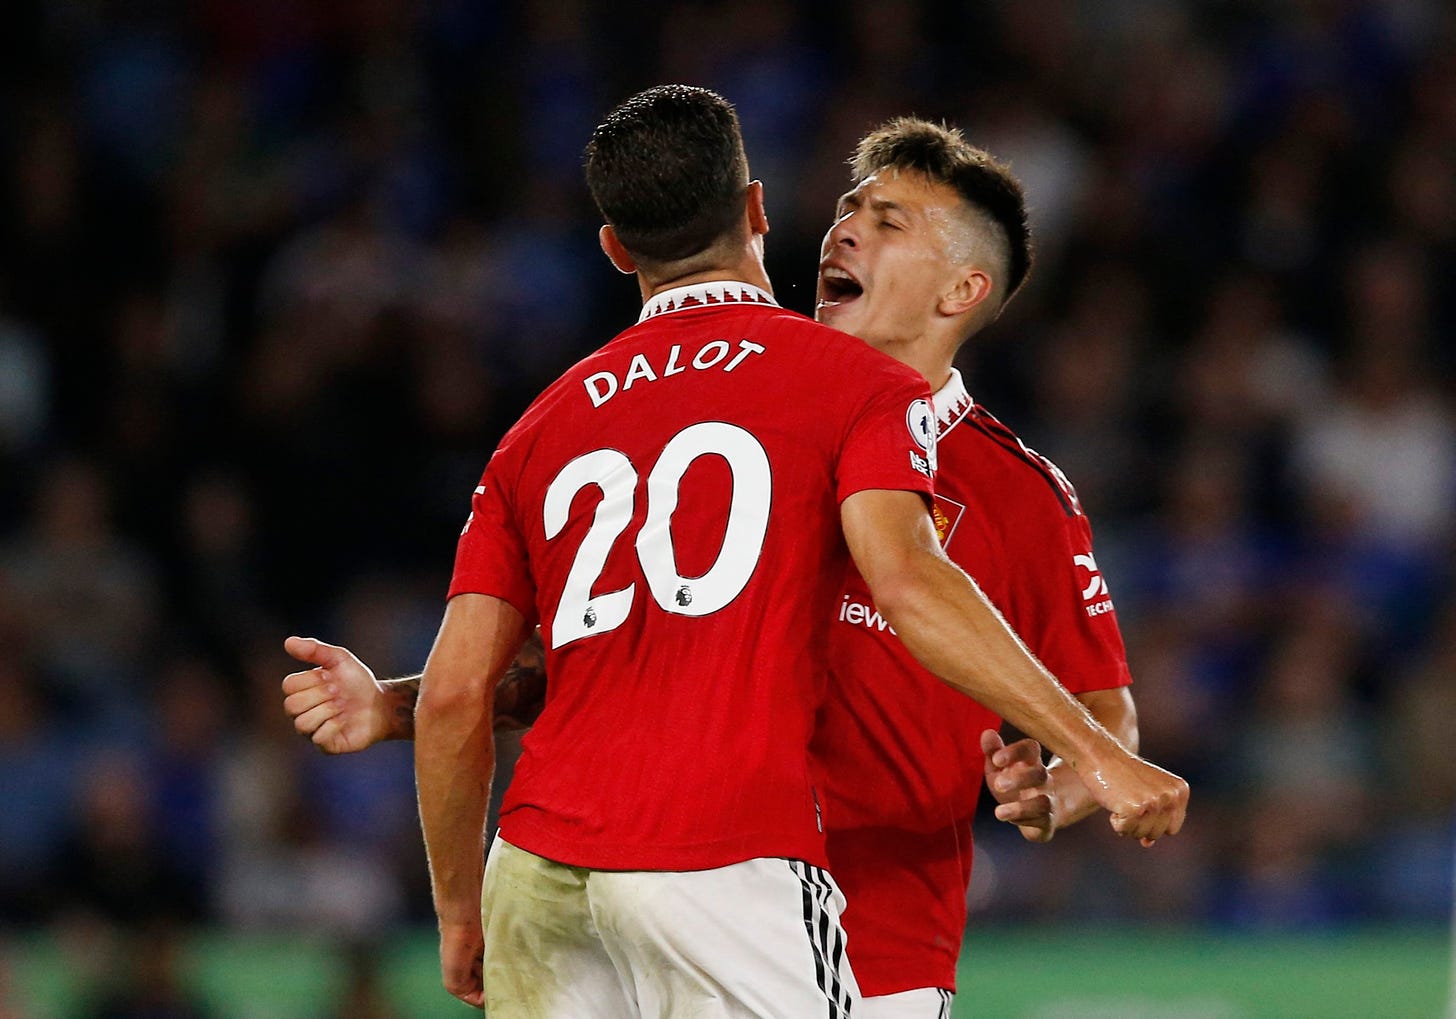 Jadon Sancho is Erik ten Hag's breakout star but Man Utd's defence deserve  credit in dogged win at Leicester